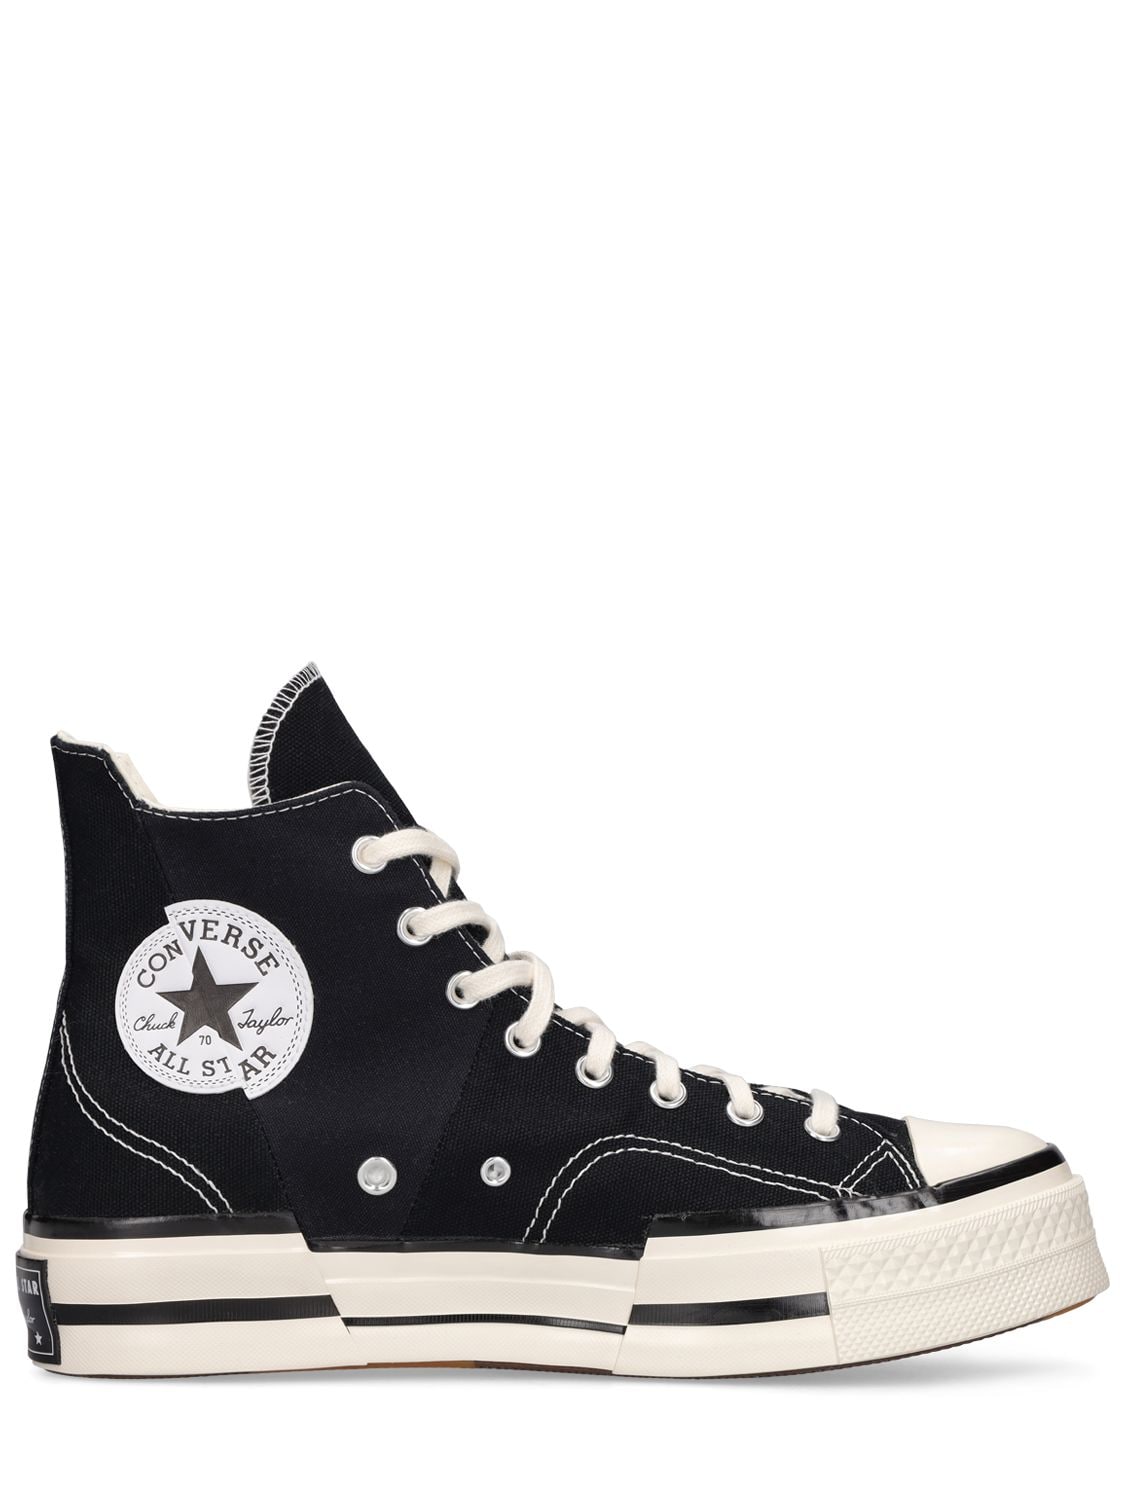 CONVERSE Chuck 70 Plus Distorted High Sneakers